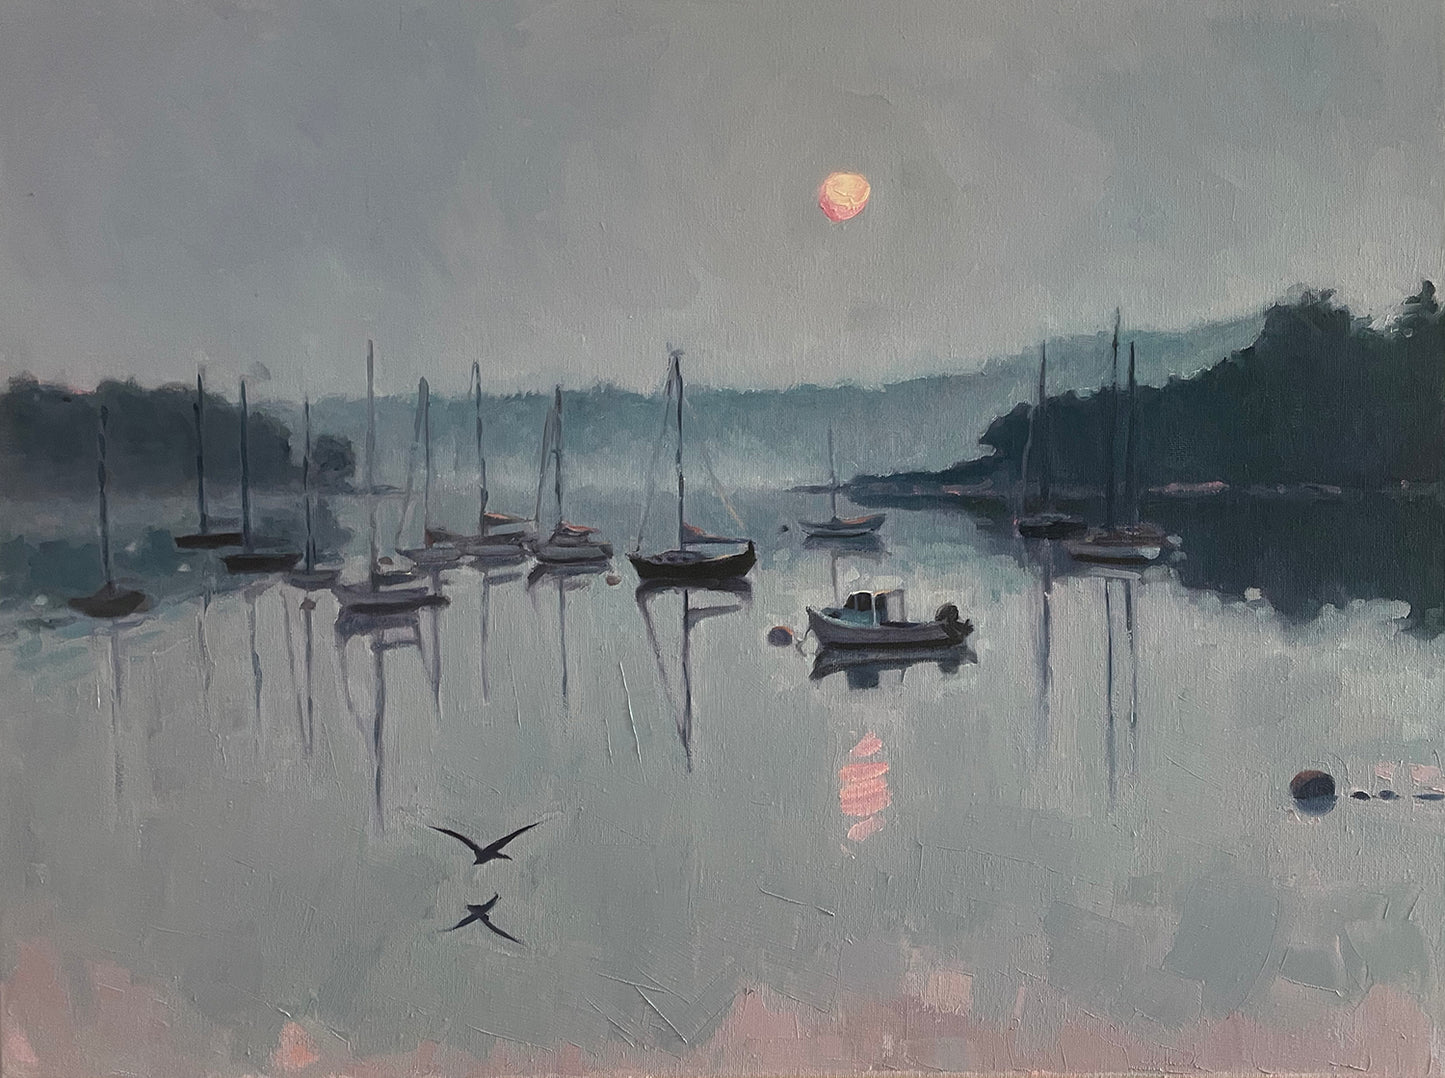 Quiet Mist in the Mooring Field, 24 x 18 inches